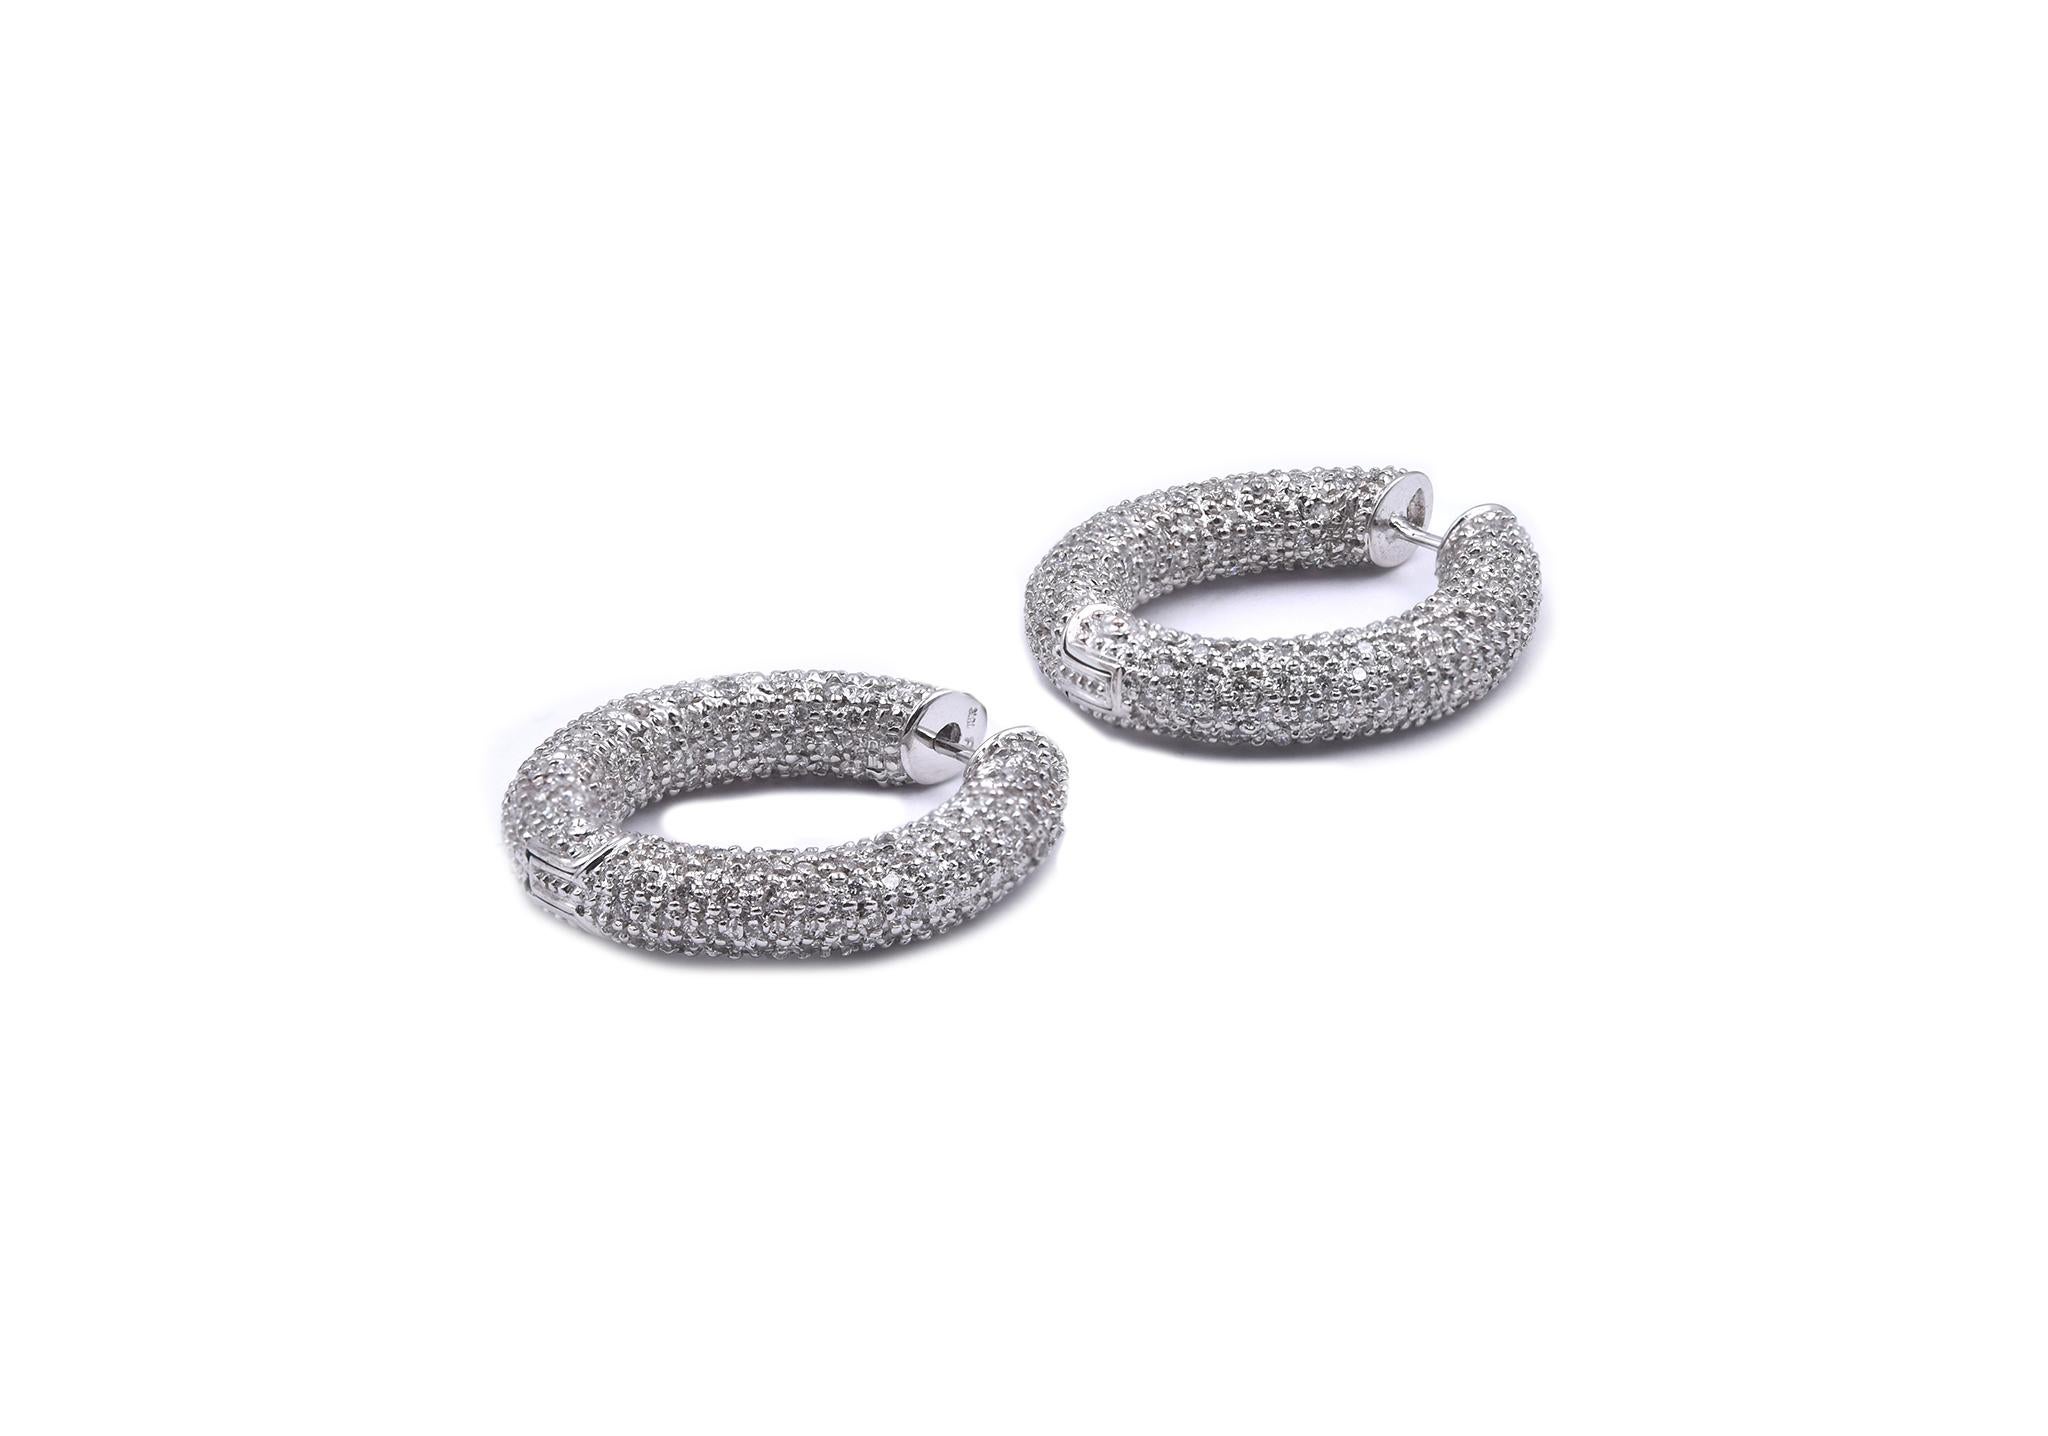 Designer: custom
Material: 14K white gold
Diamonds: round cut = 3.00cttw
Color: G
Clarity: SI2
Dimensions: earrings measure 30mm long
Weight: 18.50 grams
